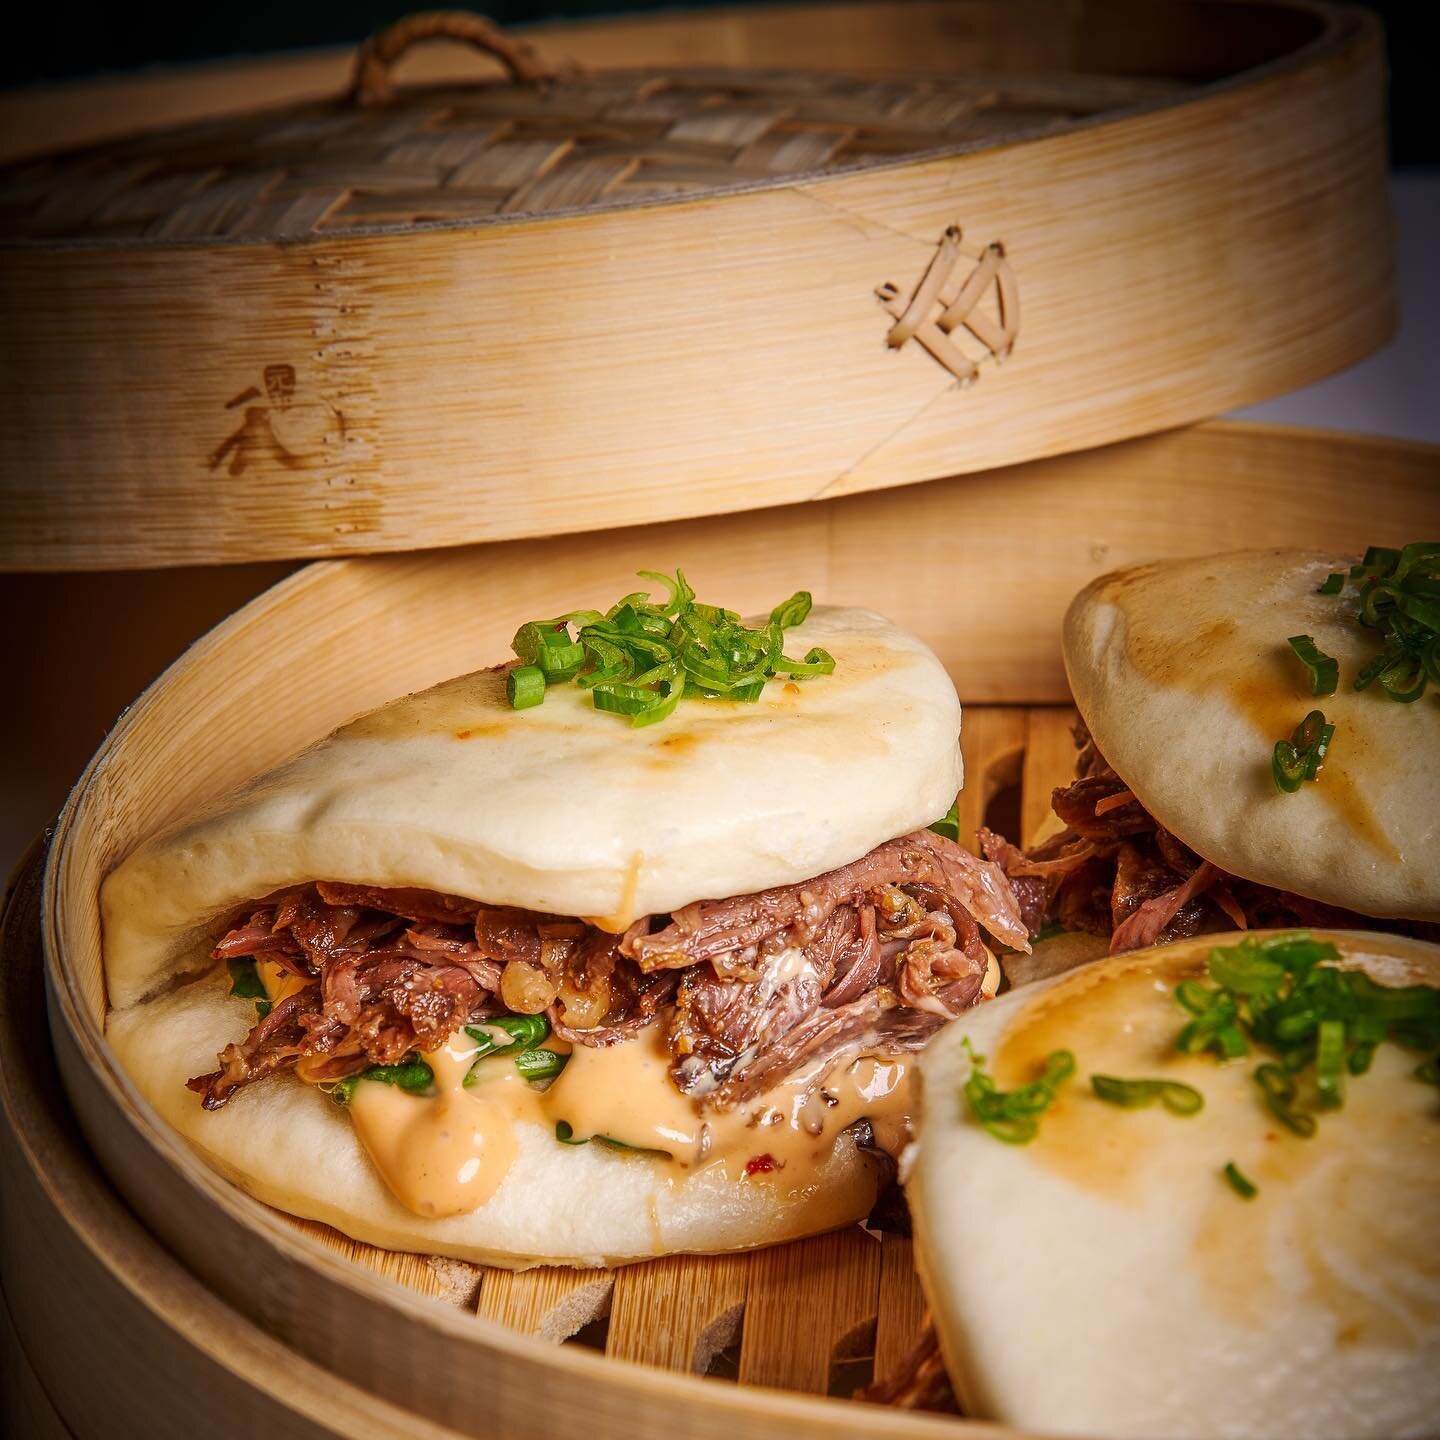 Mmmm&hellip; Who&rsquo;s feeling some Beef Bao&rsquo;s🤤

Make a reservation:⁠
📞 020 3982 0890⁠
🌐 cieloprlr.co.uk⁠
📍 1 Charcot Rd, London NW9 5HG⁠
.⁠
.⁠
.⁠
#cieloprlr #finedine #drink #strawberrydaiquri #lounge #restaurant #shisha #shishatime #shi